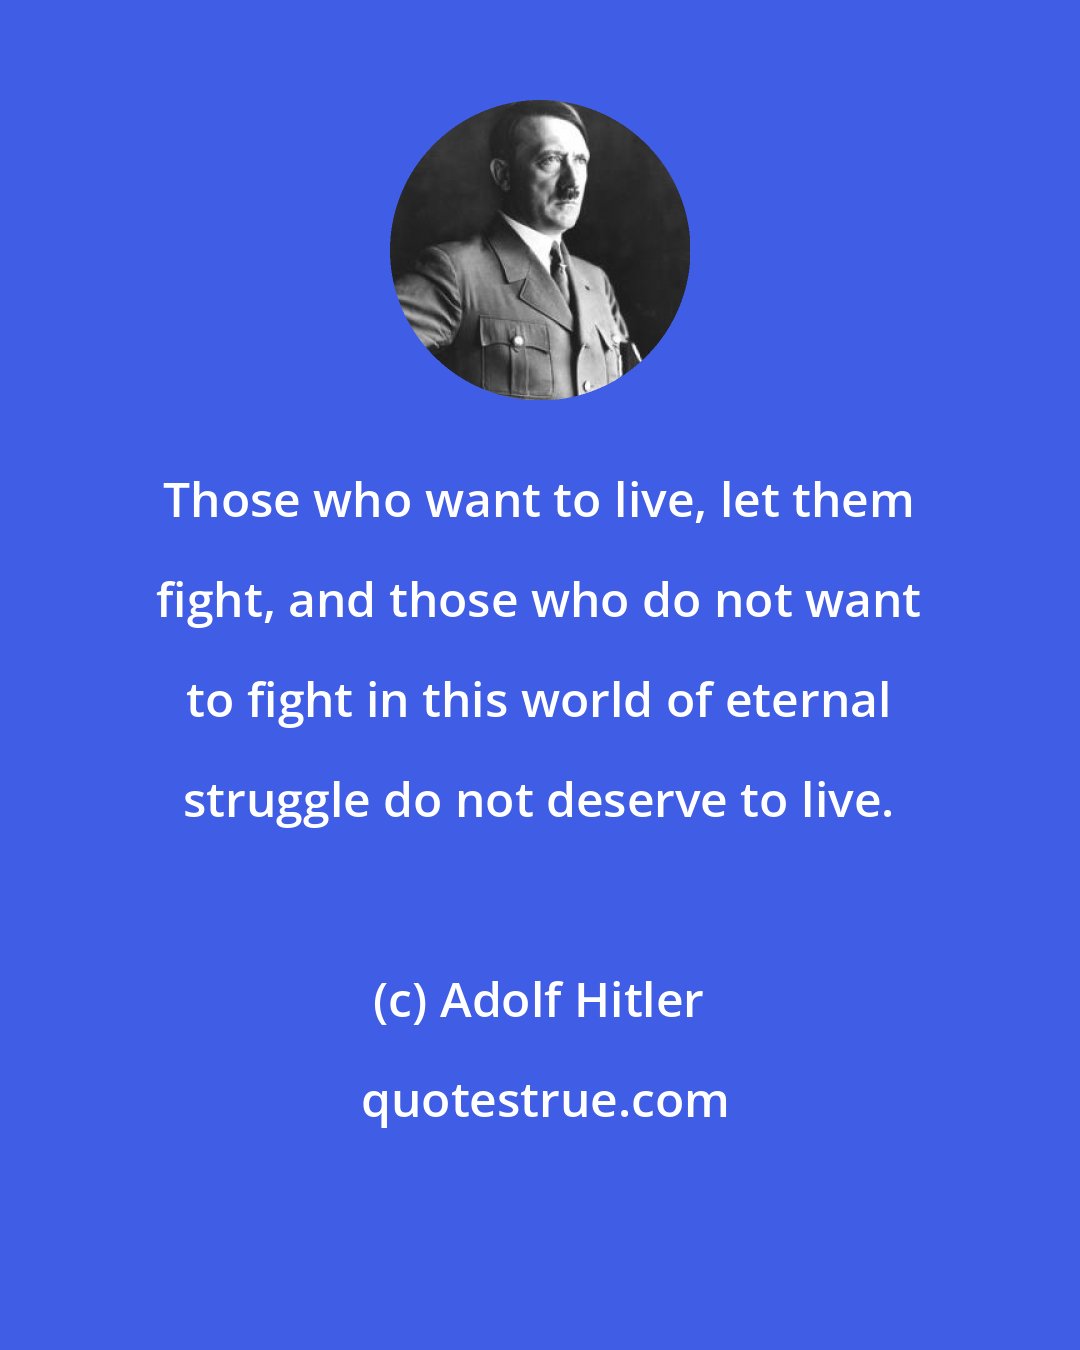 Adolf Hitler: Those who want to live, let them fight, and those who do not want to fight in this world of eternal struggle do not deserve to live.